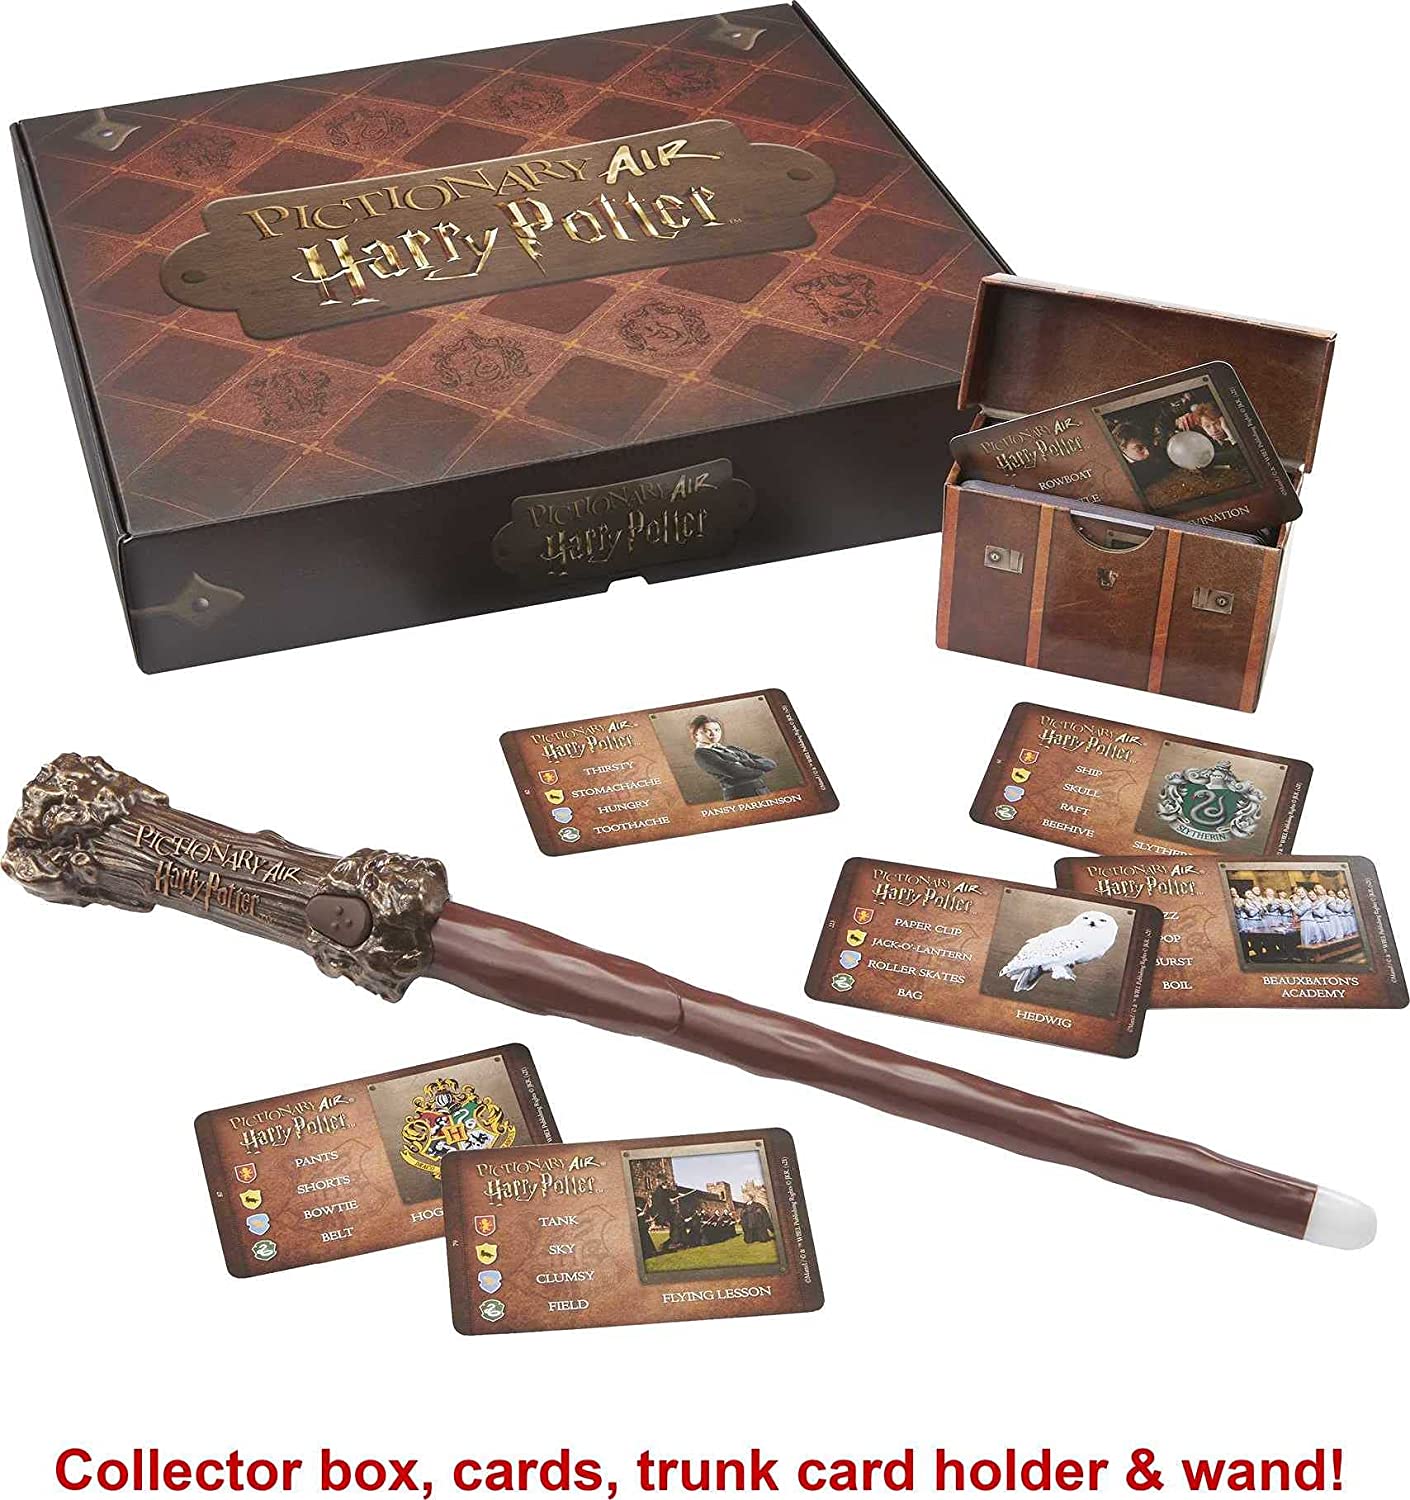 Mattel Pictionary Air Harry Potter Family Drawing Game, Wand Pen, 112 Double-Sided Clue Cards